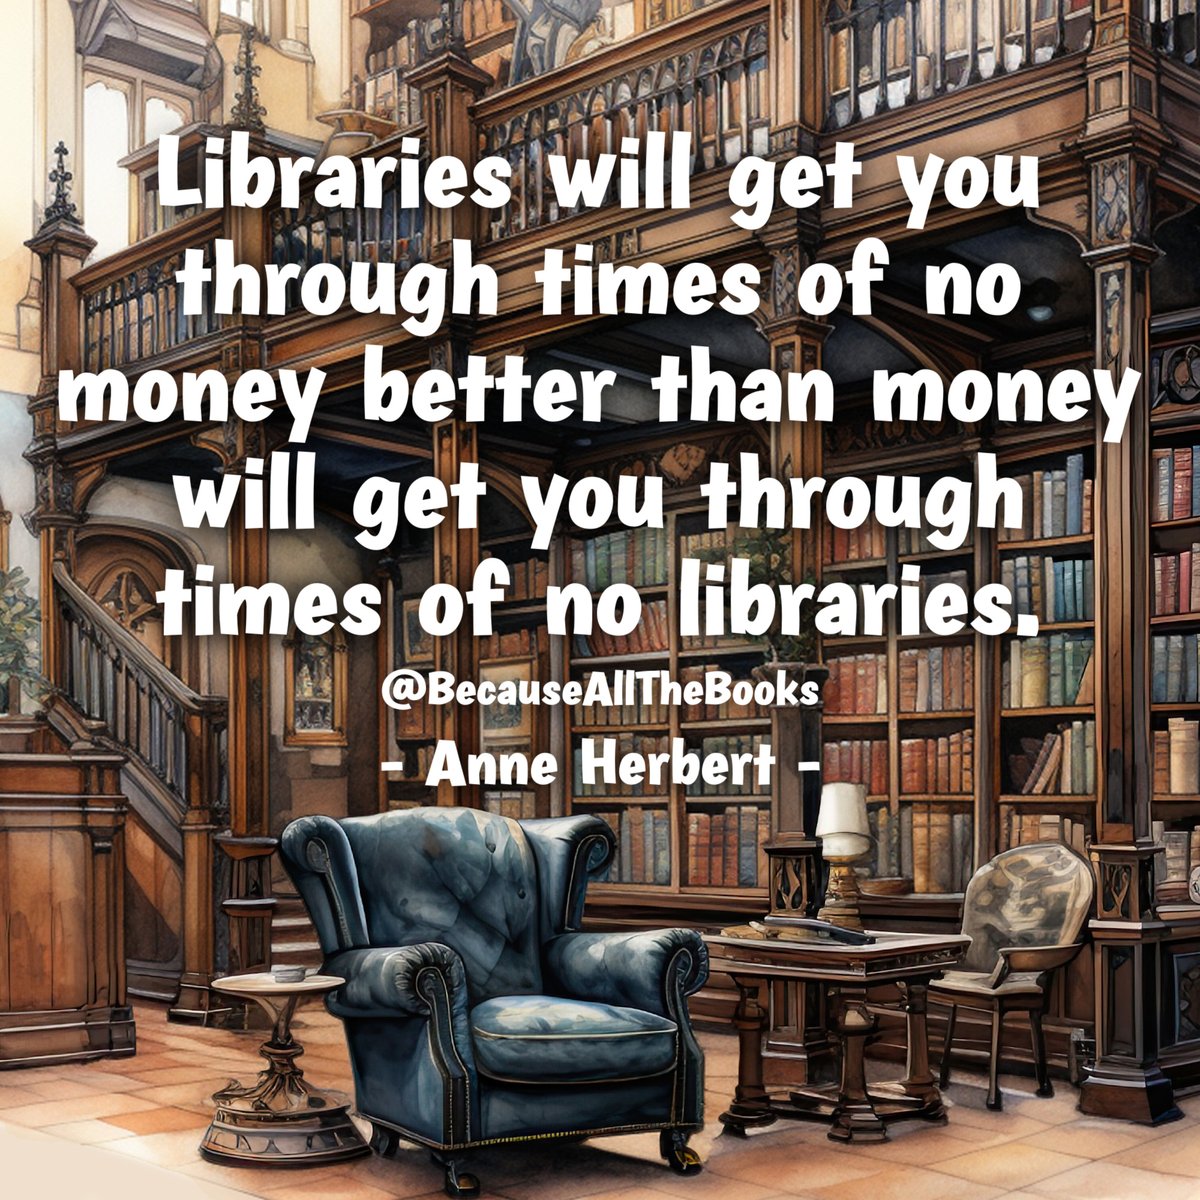 Libraries are places of refuge! 

#BecauseAllTheBooks #LibraryLove #LibrariesTransform